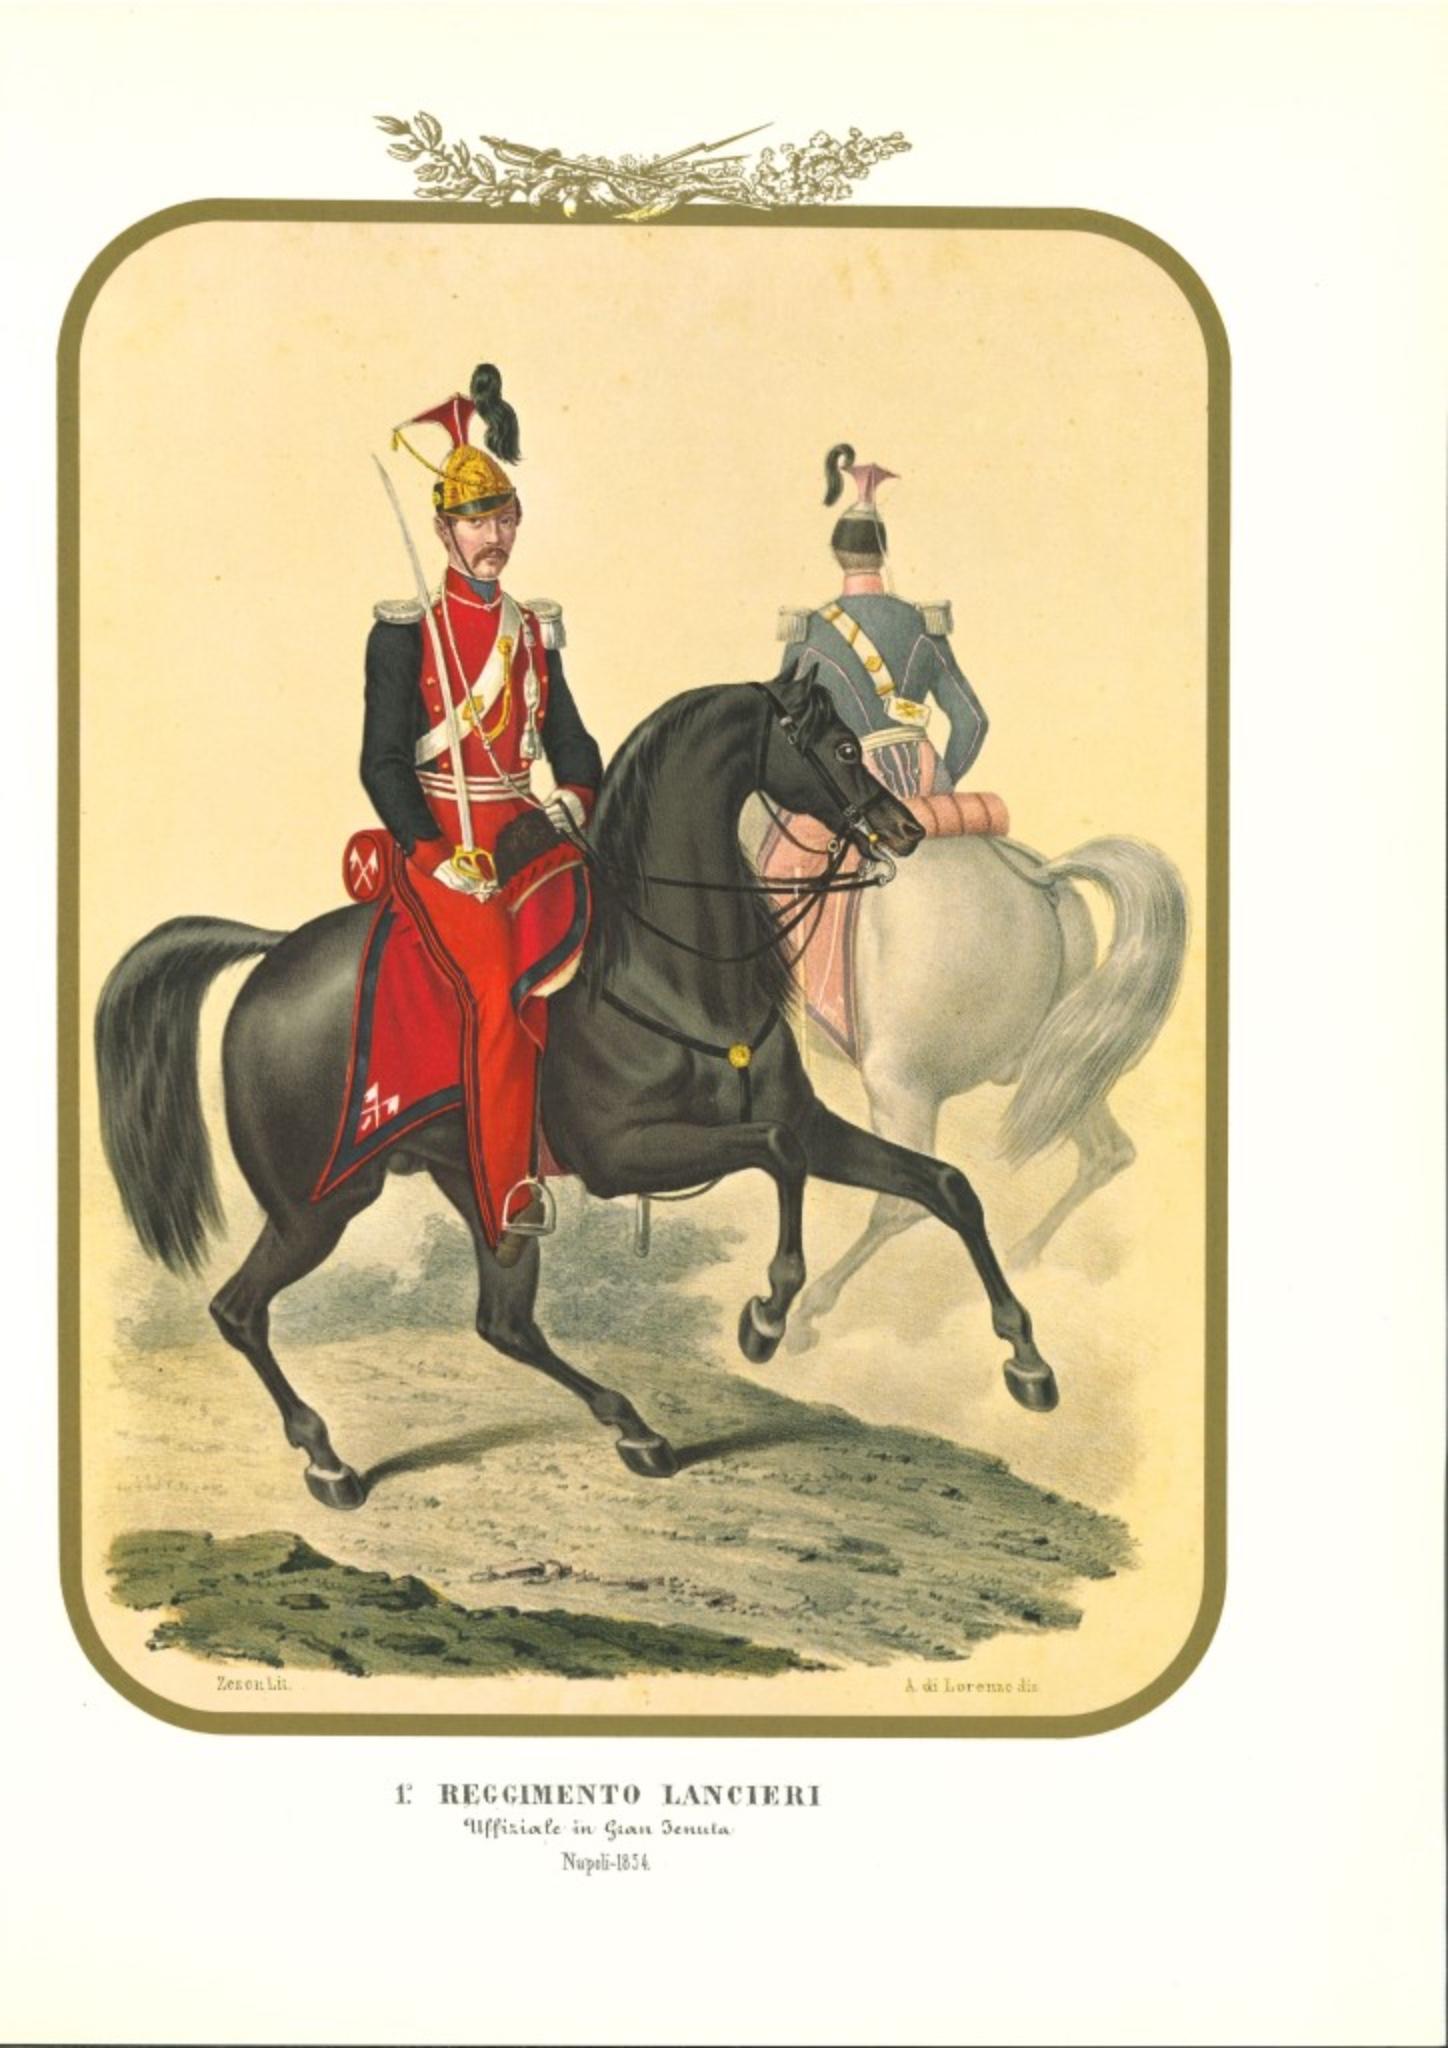 I Lancers Regiment is a lithograph by Antonio Zezon. Naples 1854.

Interesting colored lithograph which describes two members of the Lancers Regiment: in the foreground an Officer riding his horse.

In excellent condition, this print belongs to one